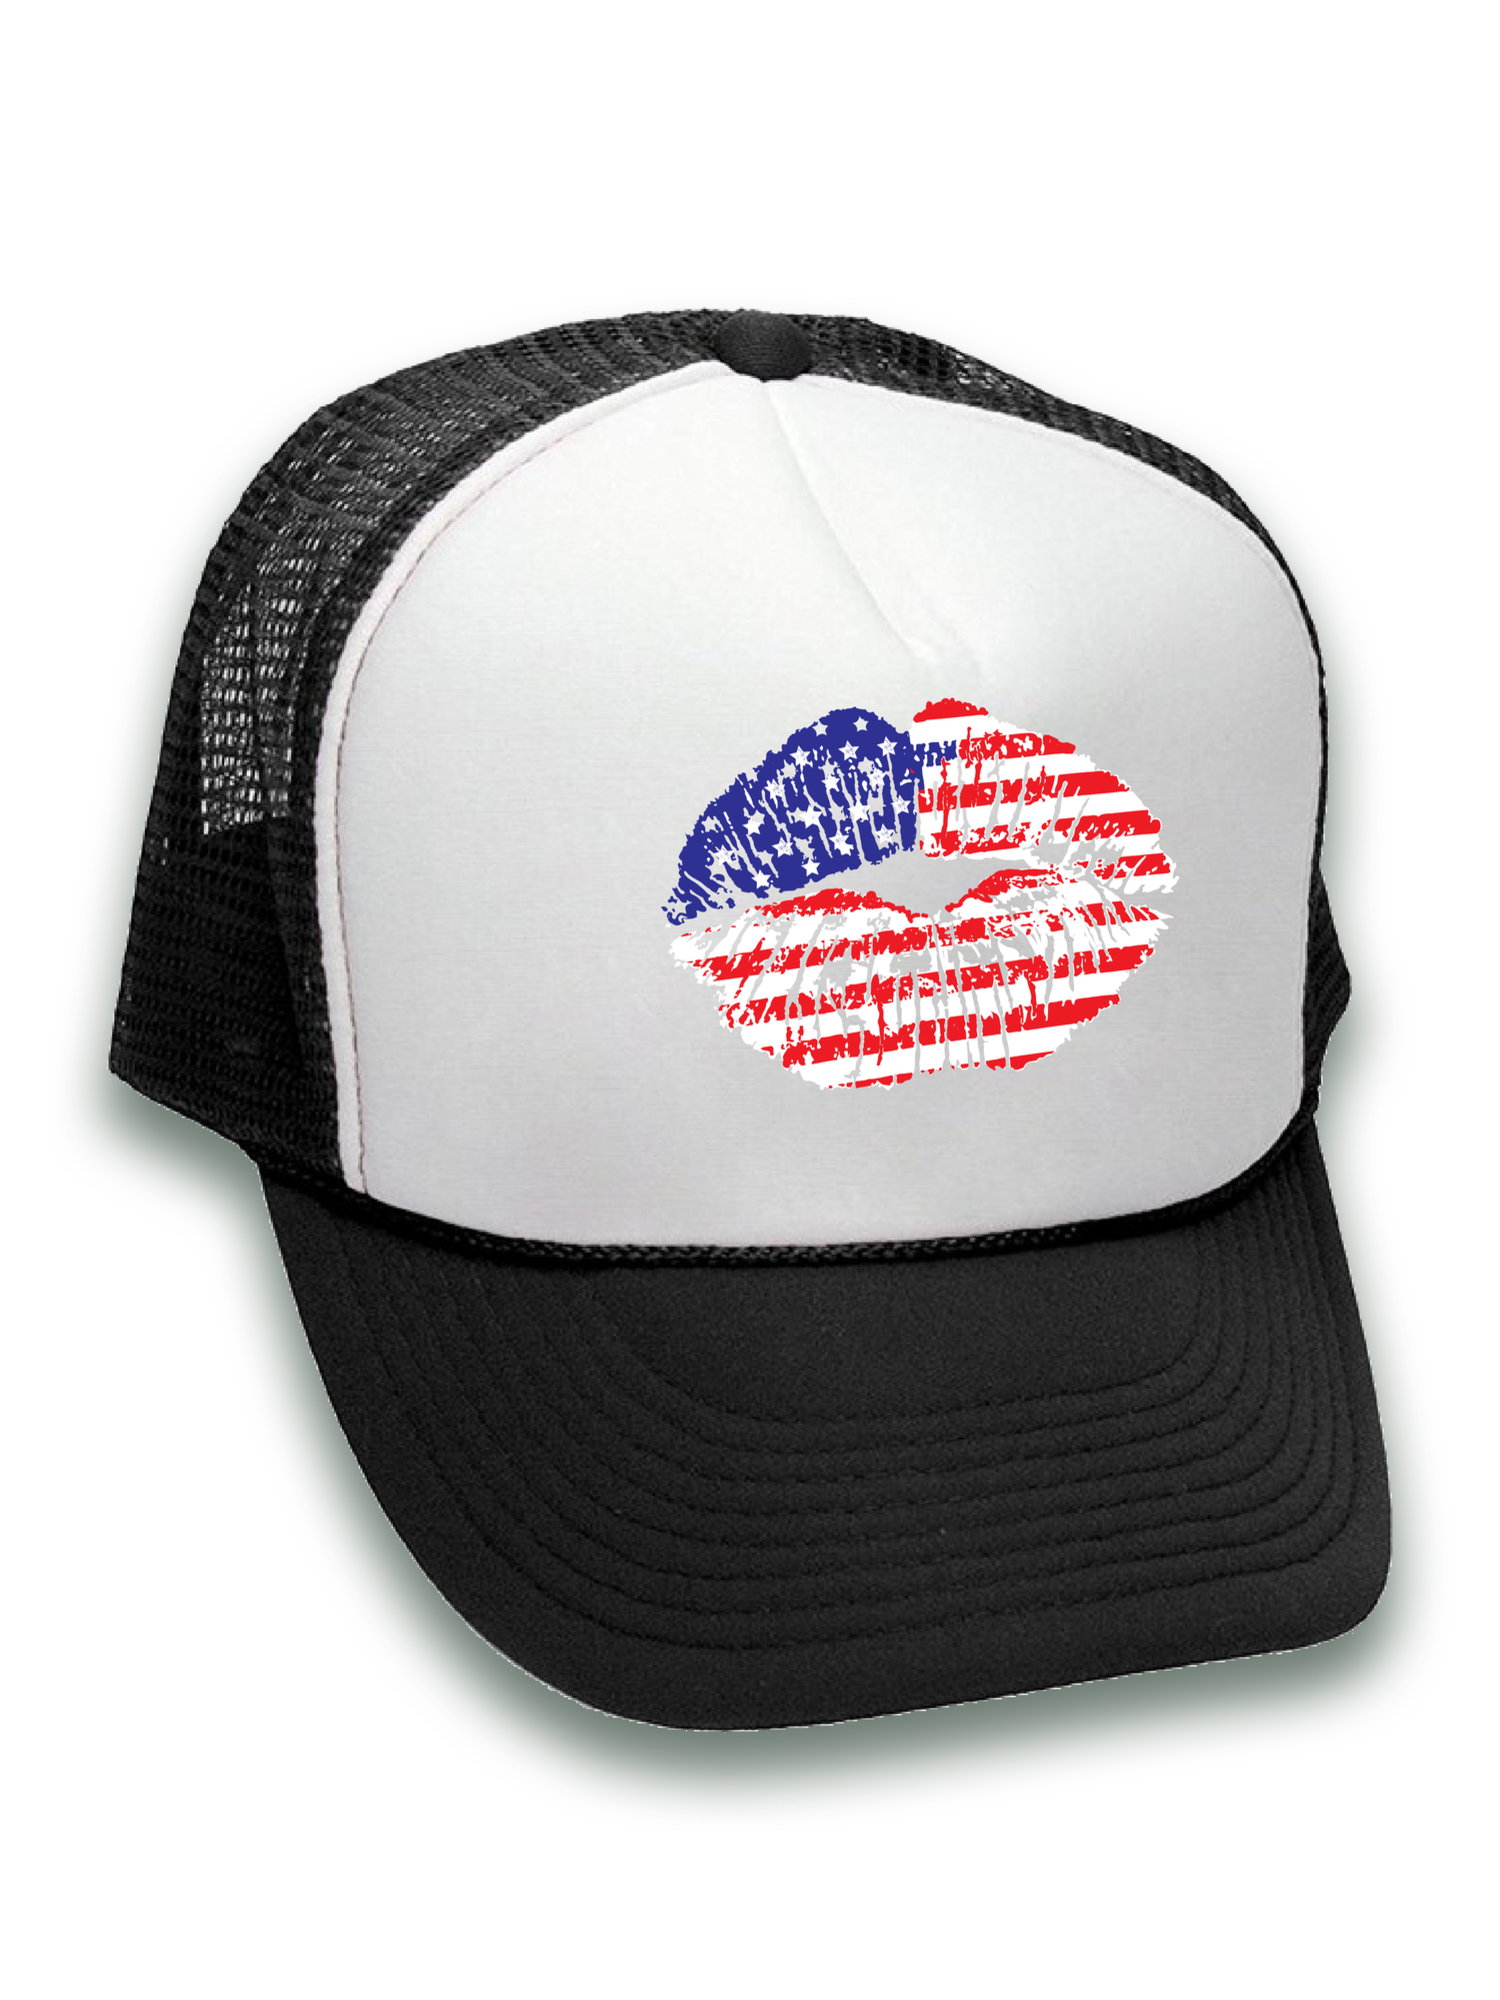 Awkward Styles American Lips Trucker Hat USA Flag Hats for Women Men USA Gifts American Flag Hat USA Baseball Cap Patriotic Hat American Flag Men Women 4th of July Hat 4th of July Accessories - image 2 of 6